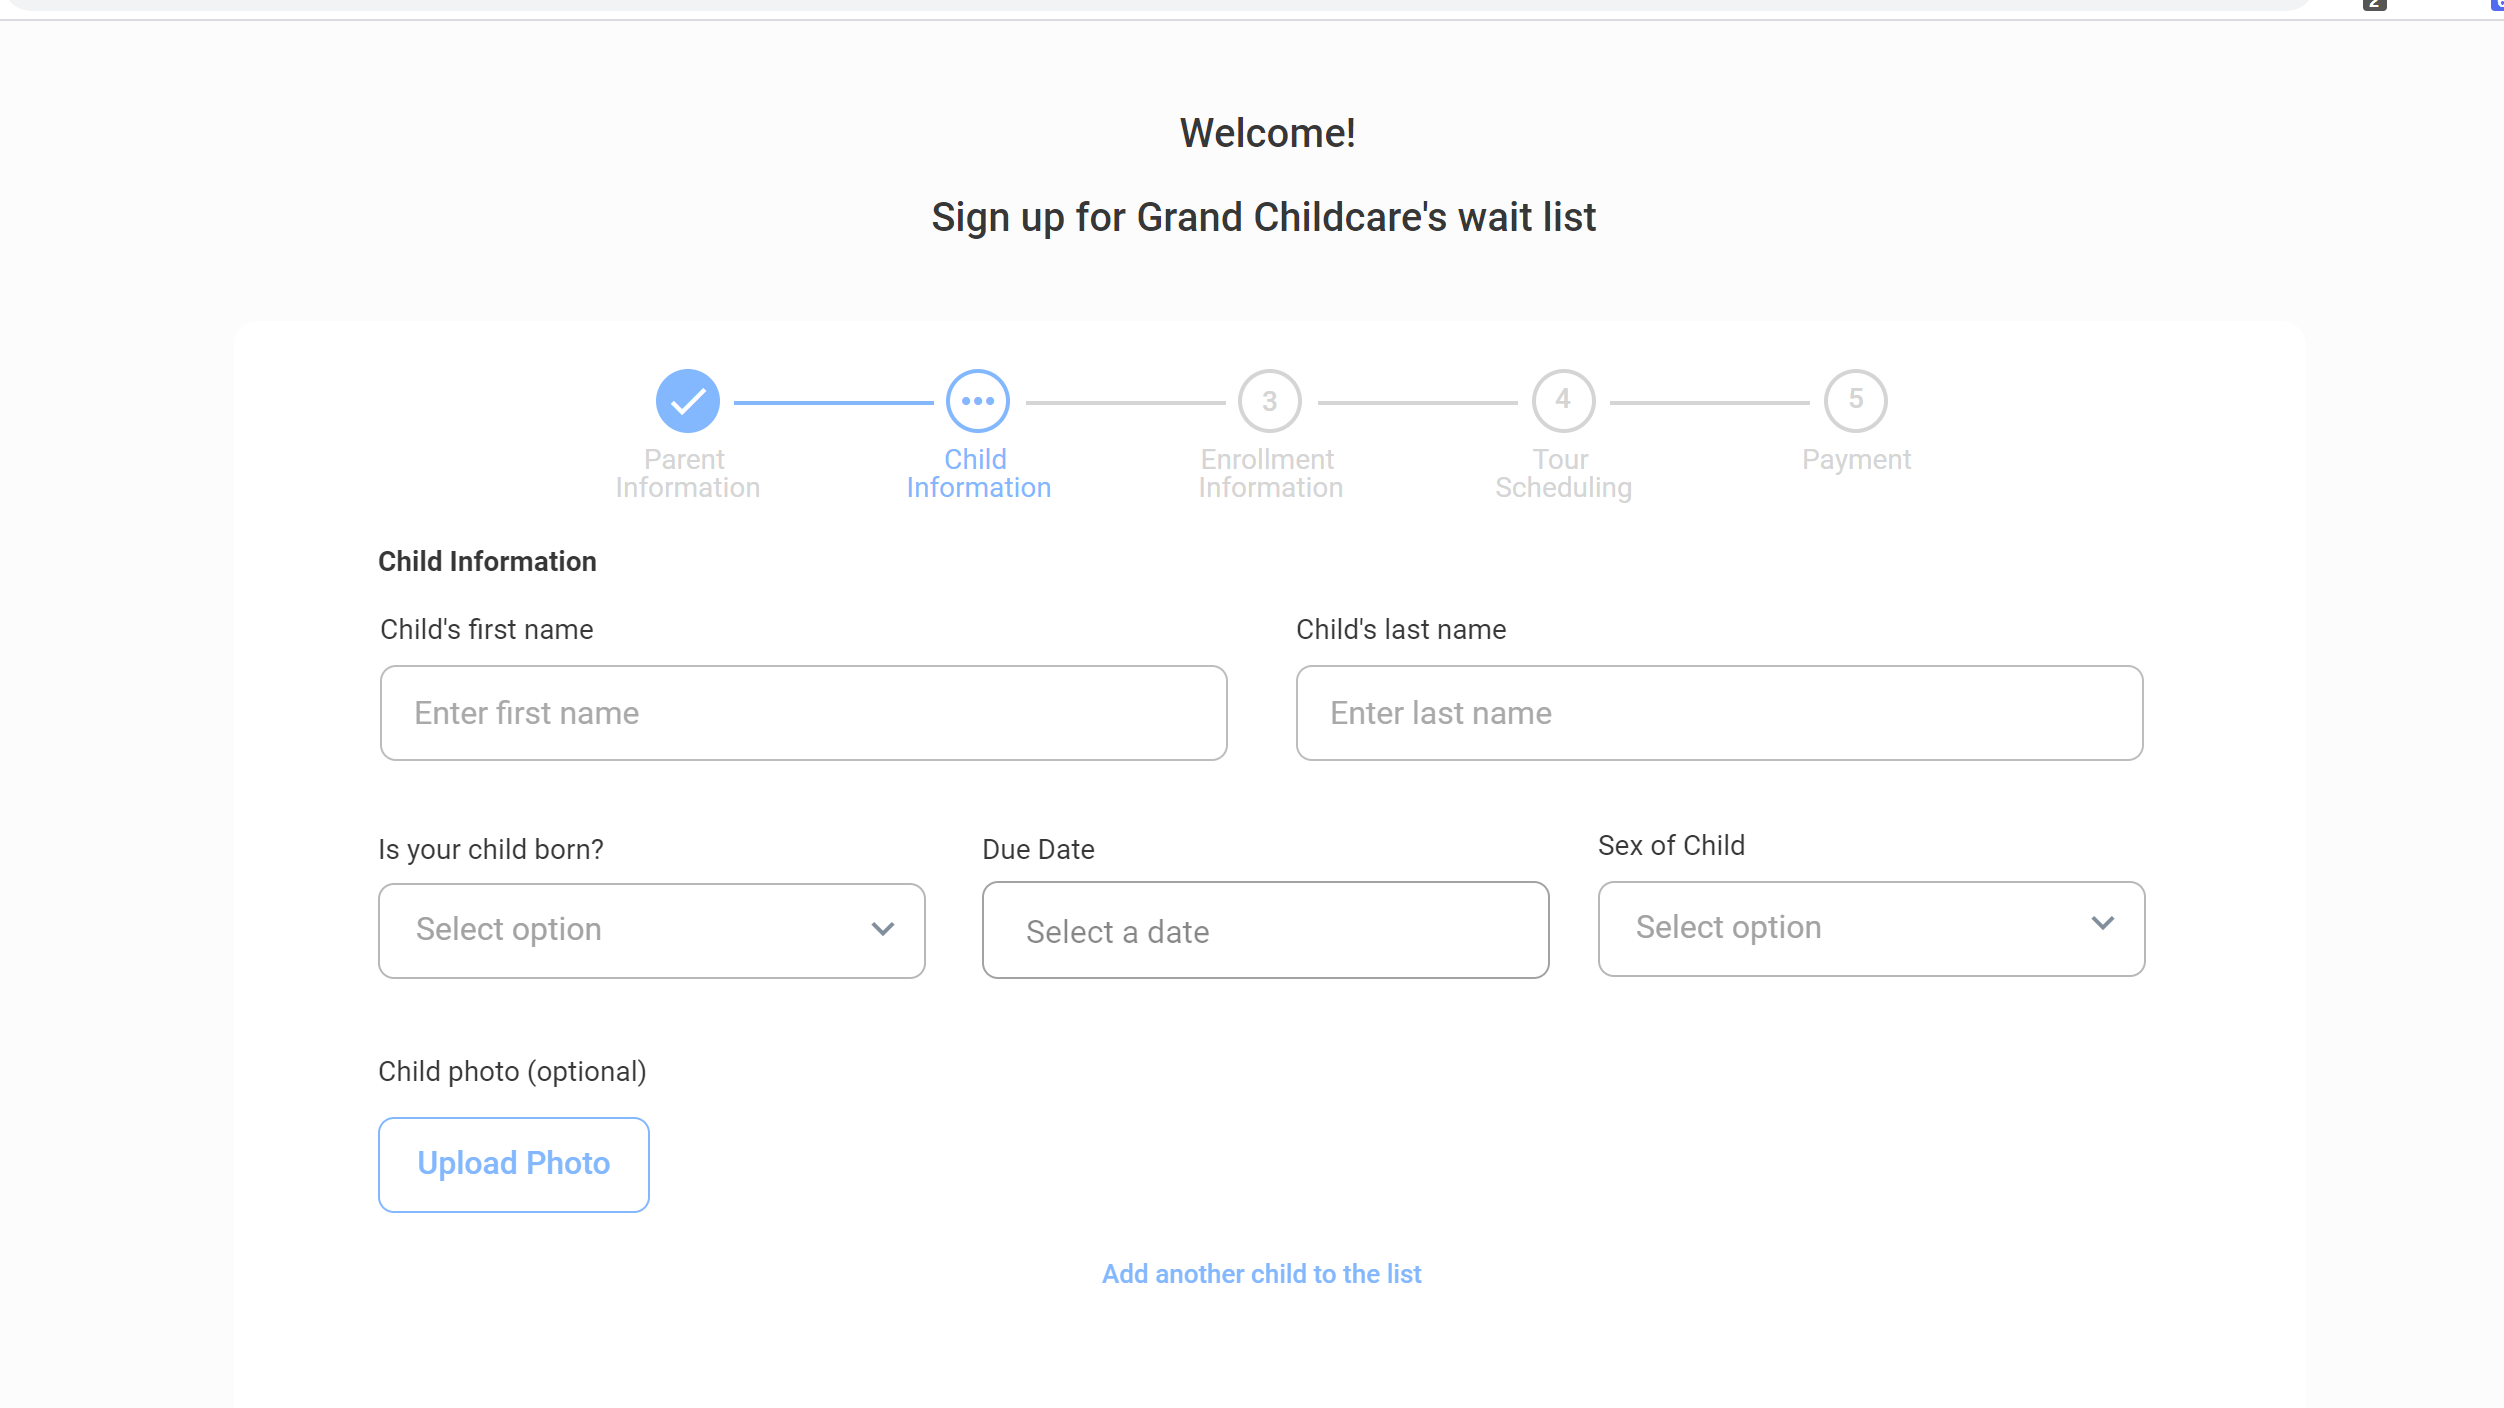 Parents sign-up for your wait list online and can easily make a payment